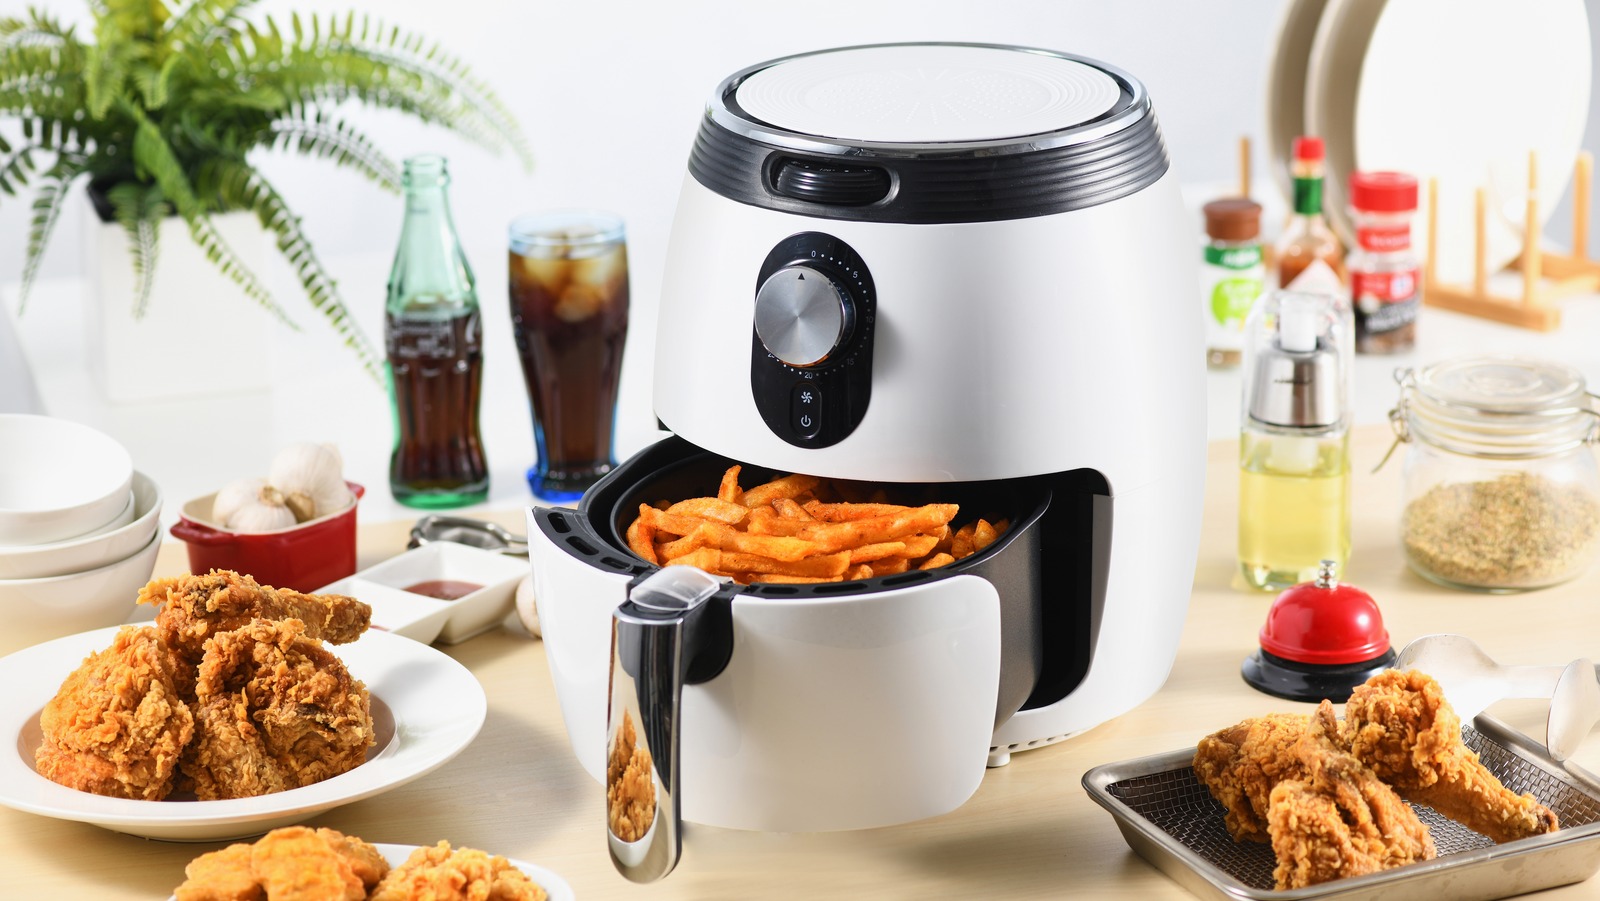 https://www.thedailymeal.com/img/gallery/do-you-always-need-to-preheat-your-air-fryer/l-intro-1673706887.jpg